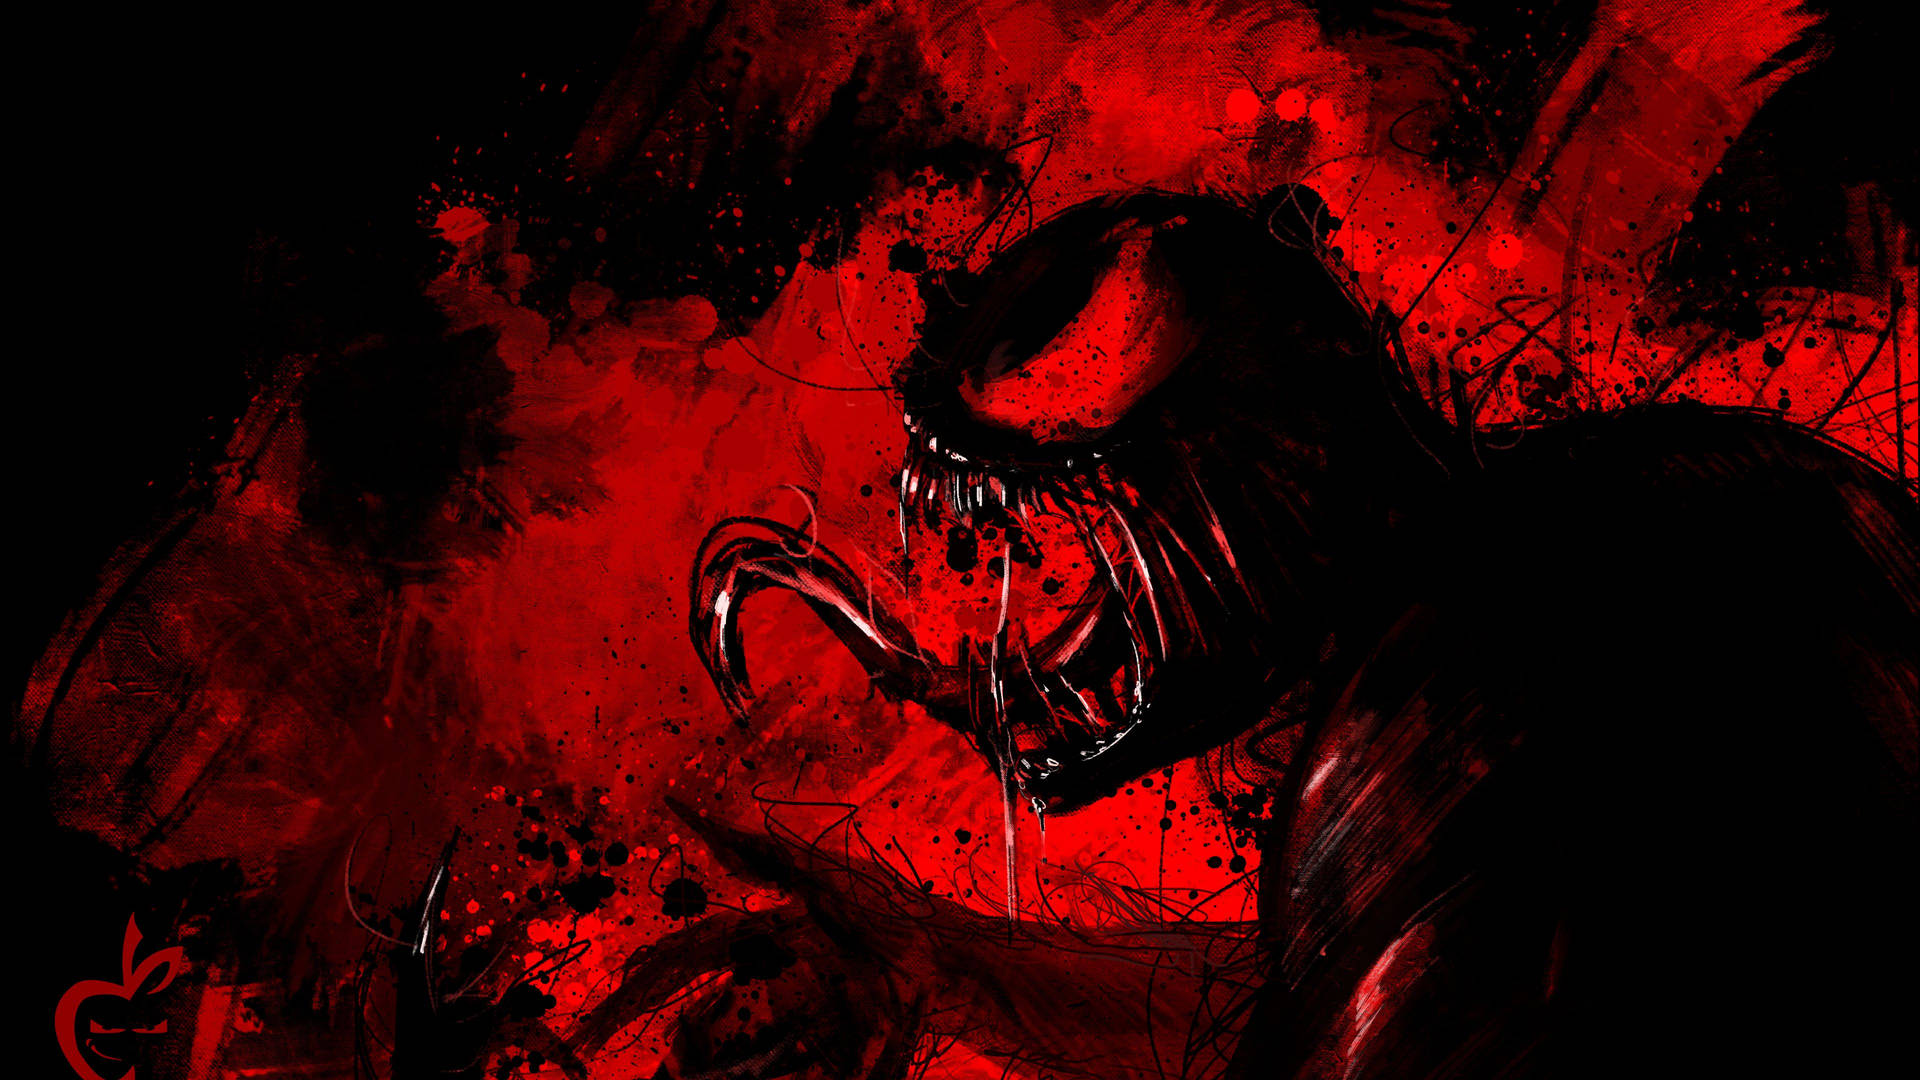 Venom Let There Be Carnage Painting Wallpaper